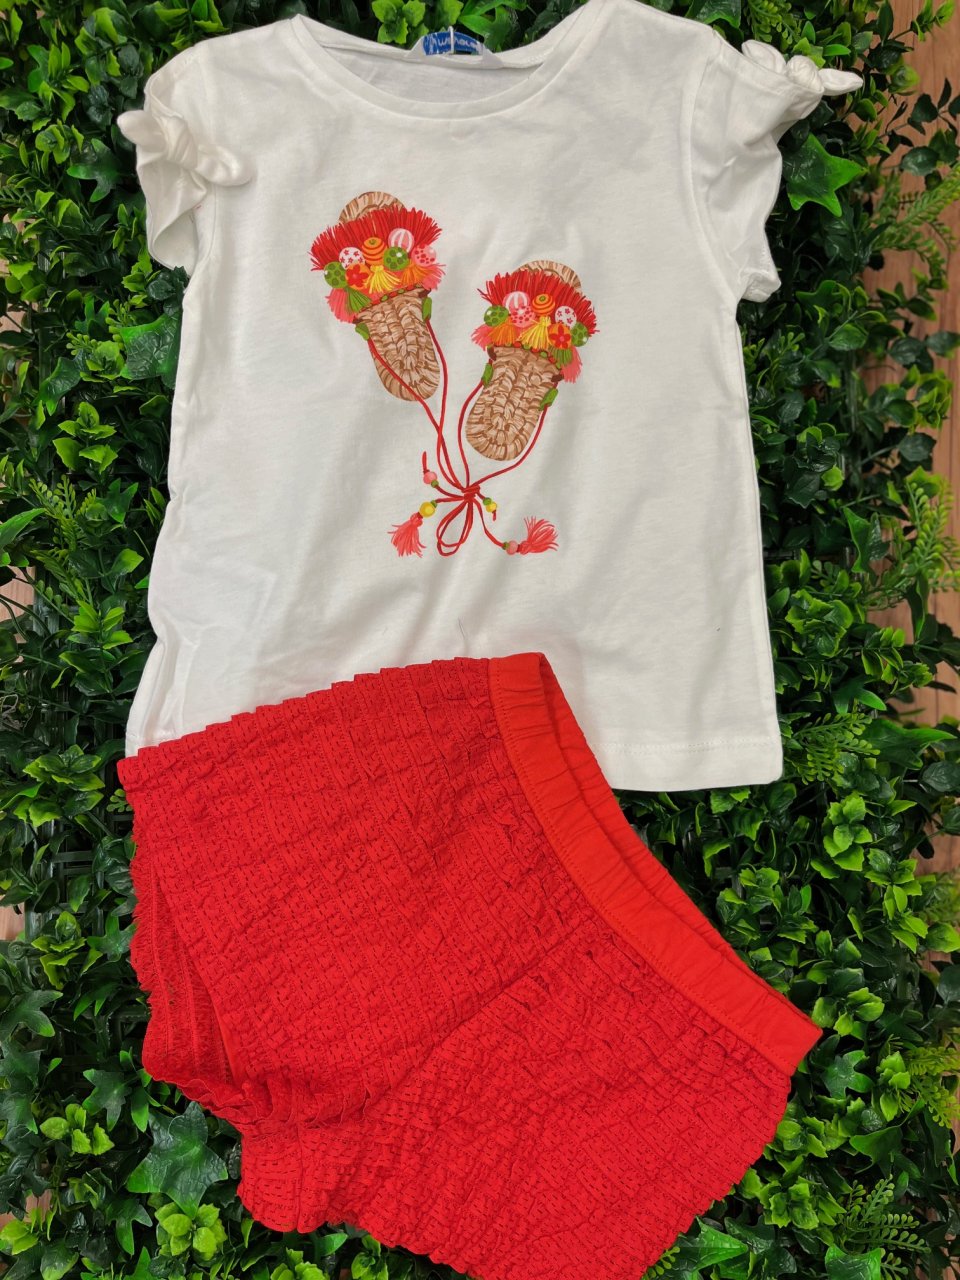 MAYORAL 3266 CREAM TEE PRIINTED DETAIL SLEEVE KNOT DETAIL RED RUFFLE SHORTS 2 PCE SET 5,6,&8YRS ONLY 